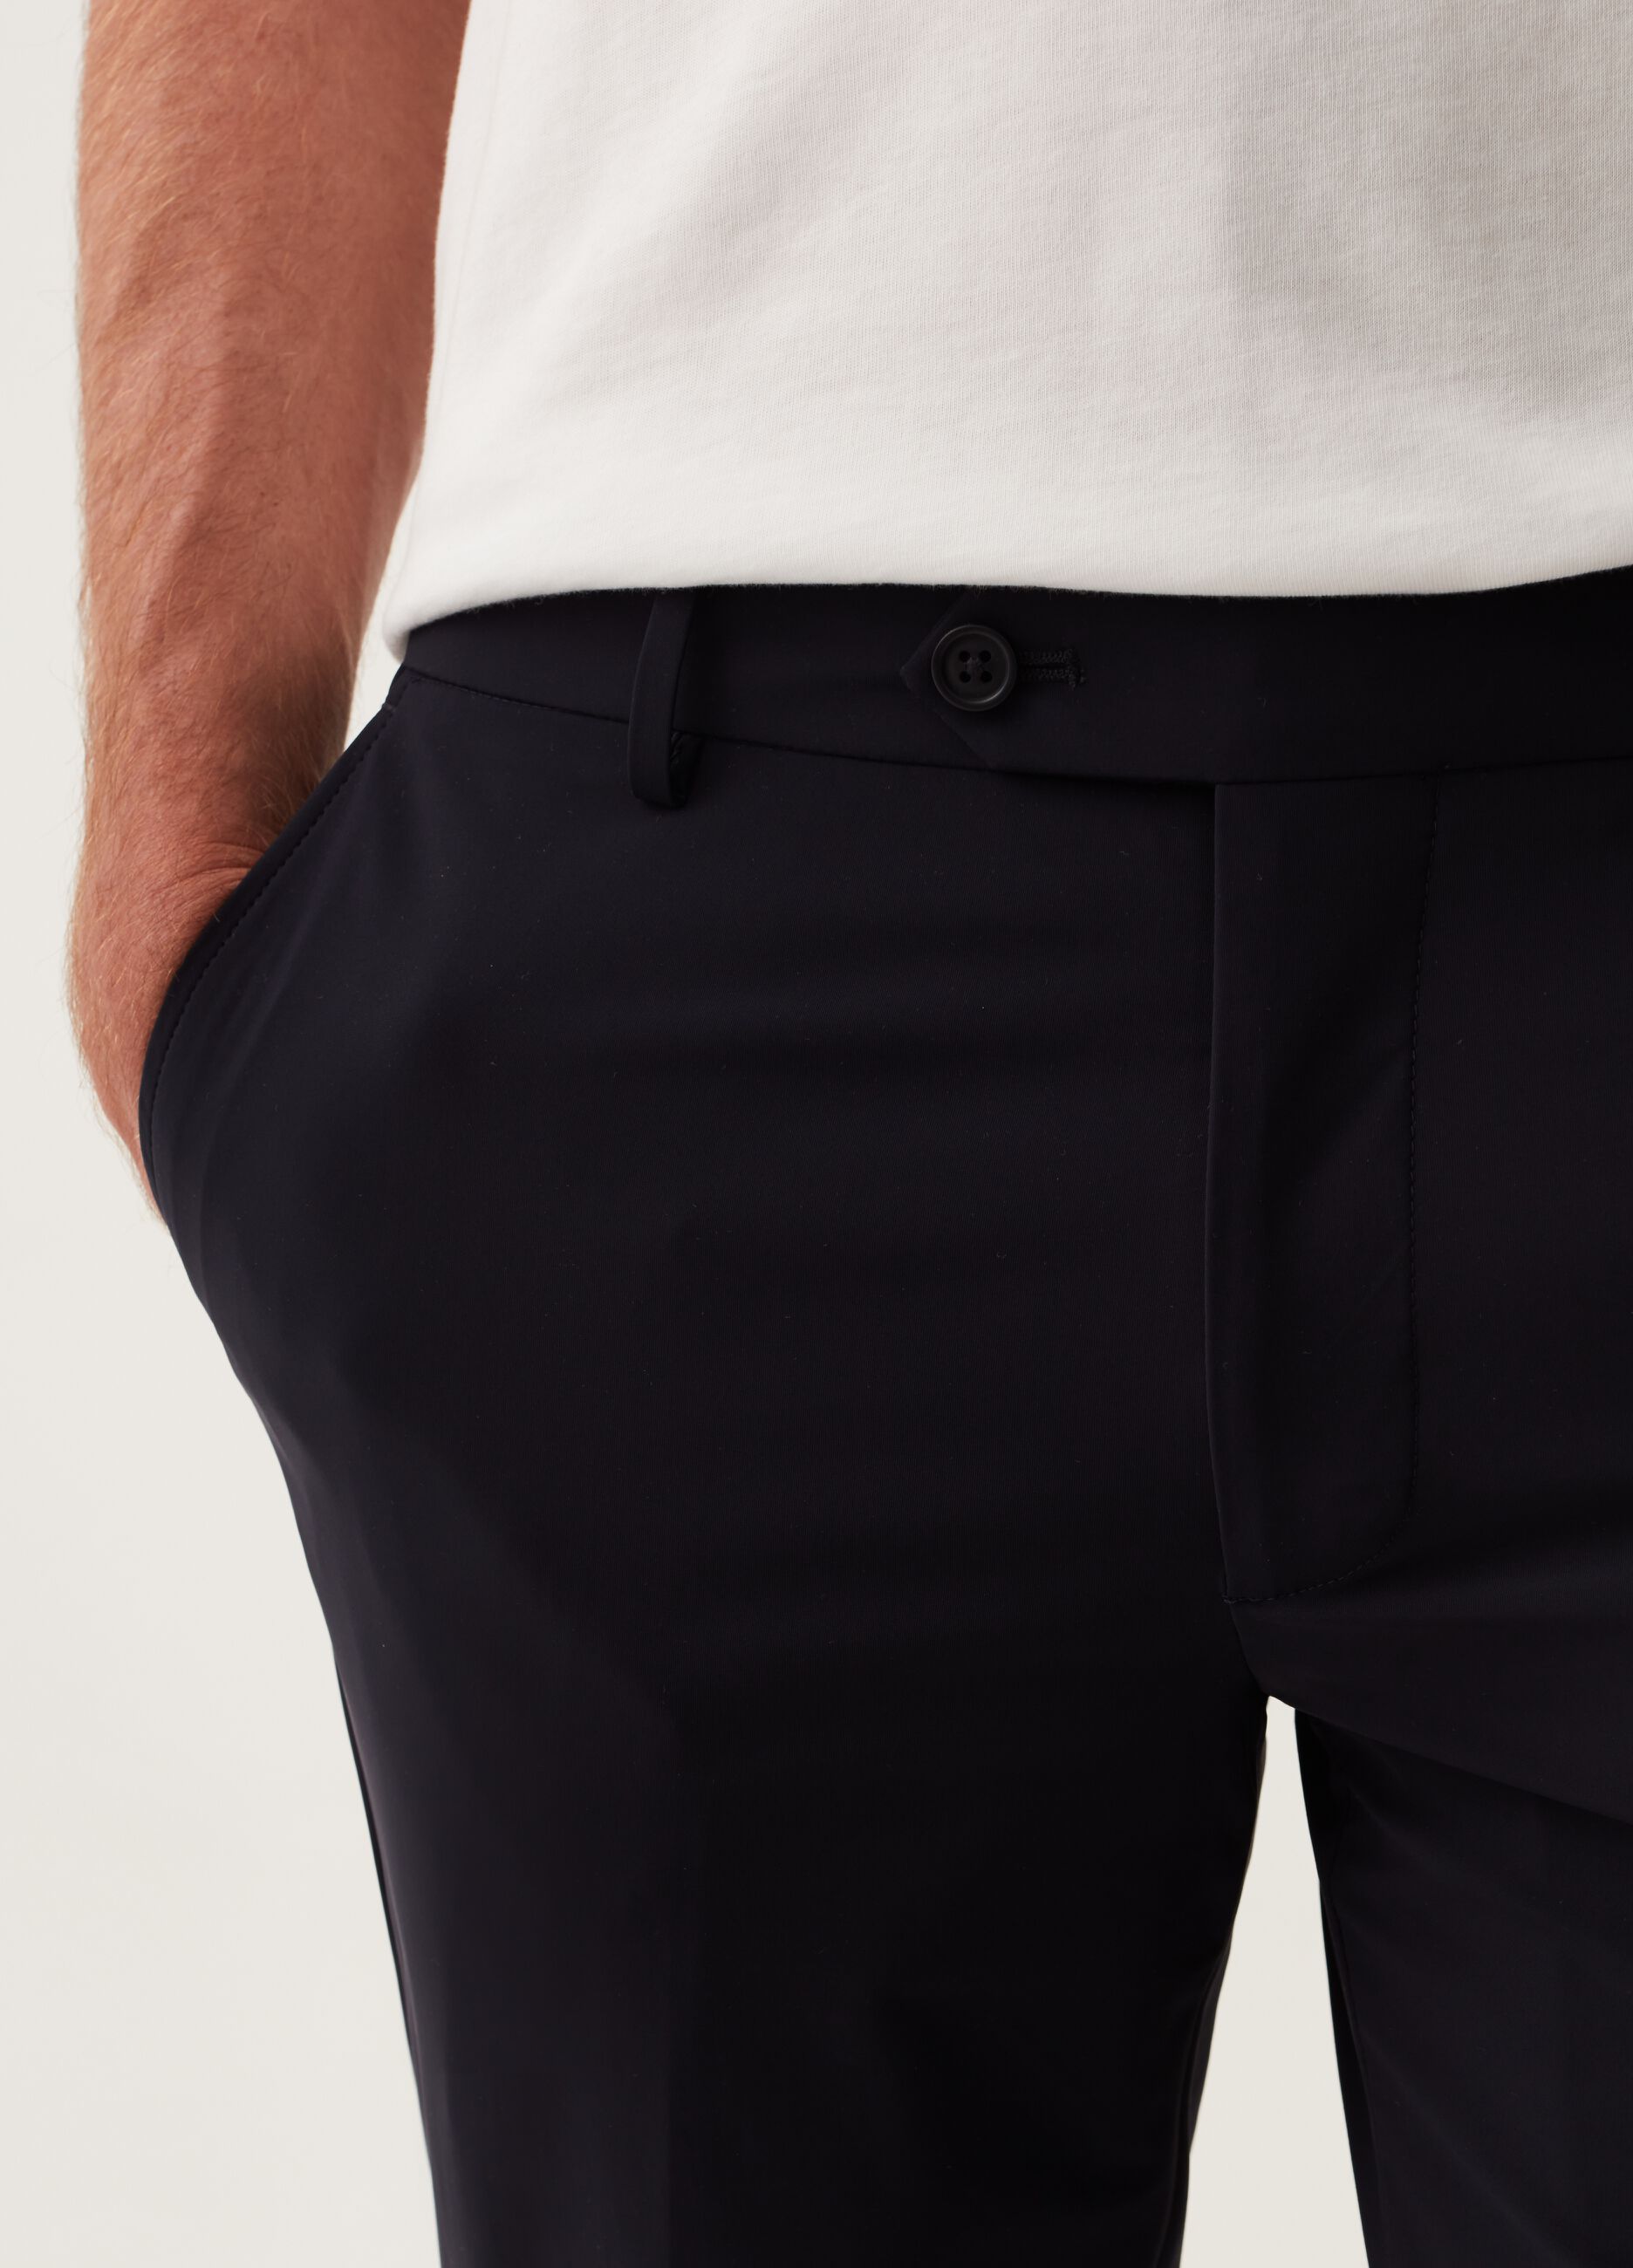 Slim-fit trousers in navy blue technical fabric